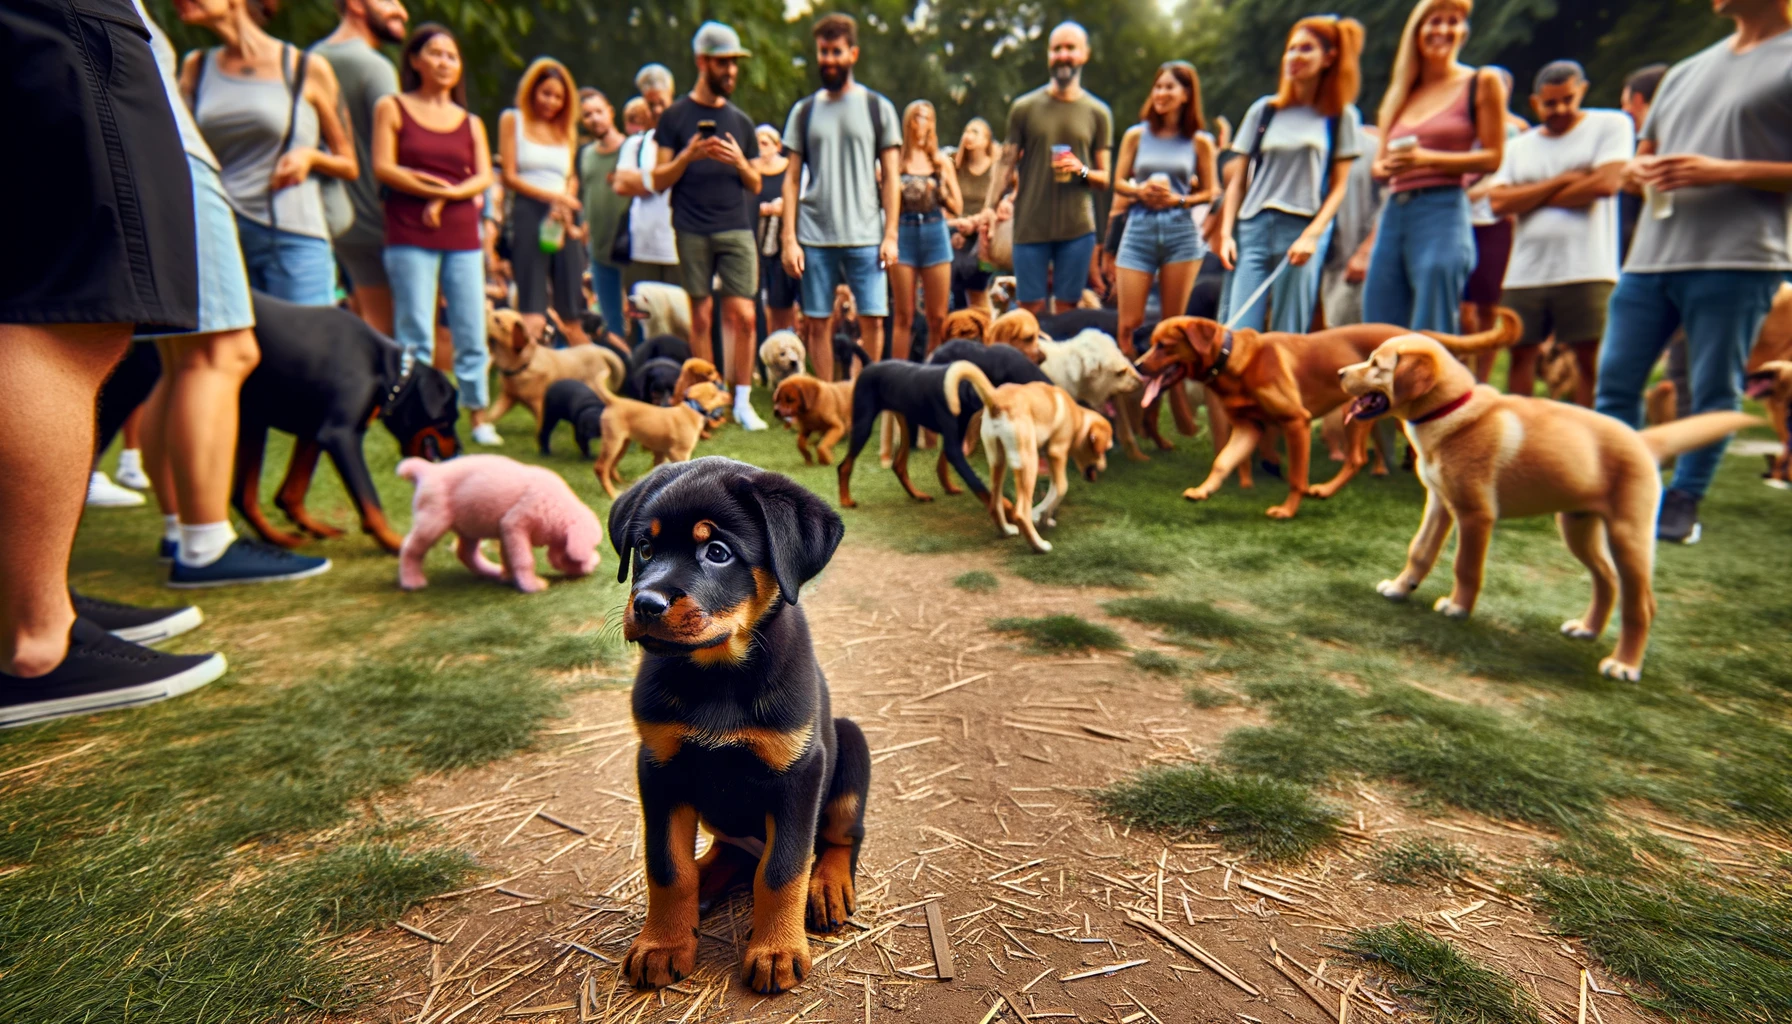 A Rottweiler Lab Mix puppy at a busy dog park, cautiously approaching other dogs and people, showcasing the importance of early socialization